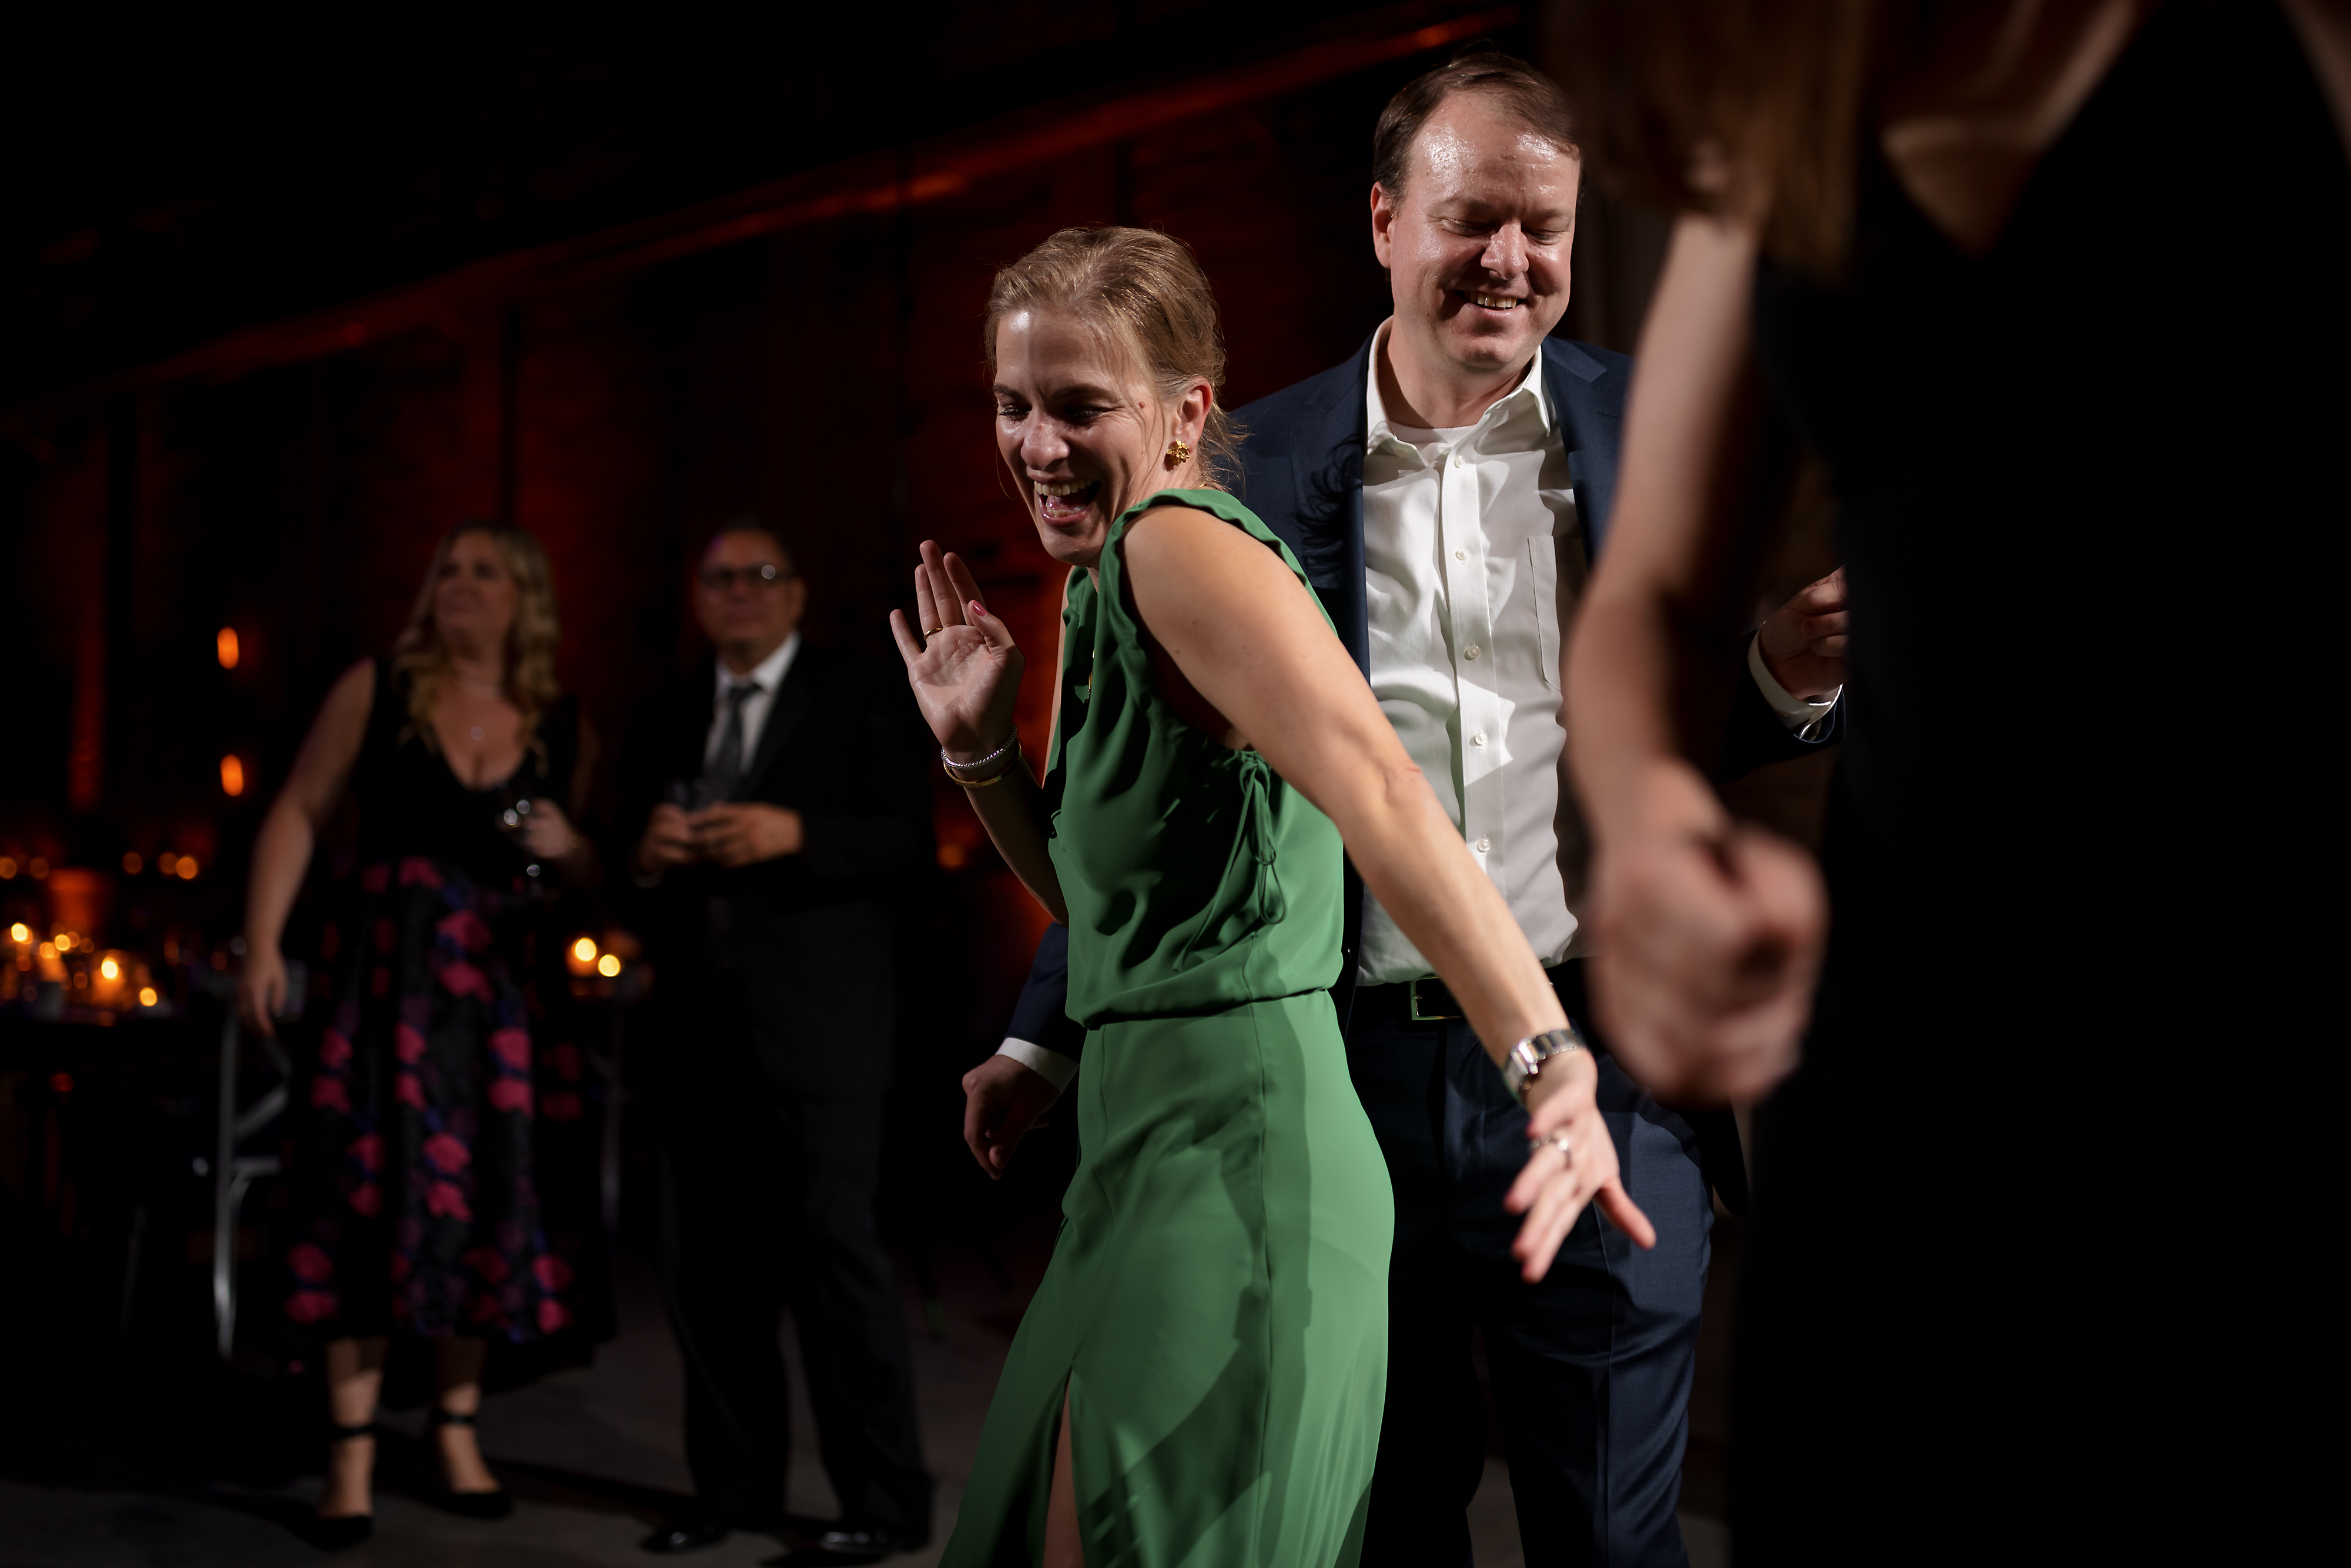 wedding guests dance during reception at The Fairlie